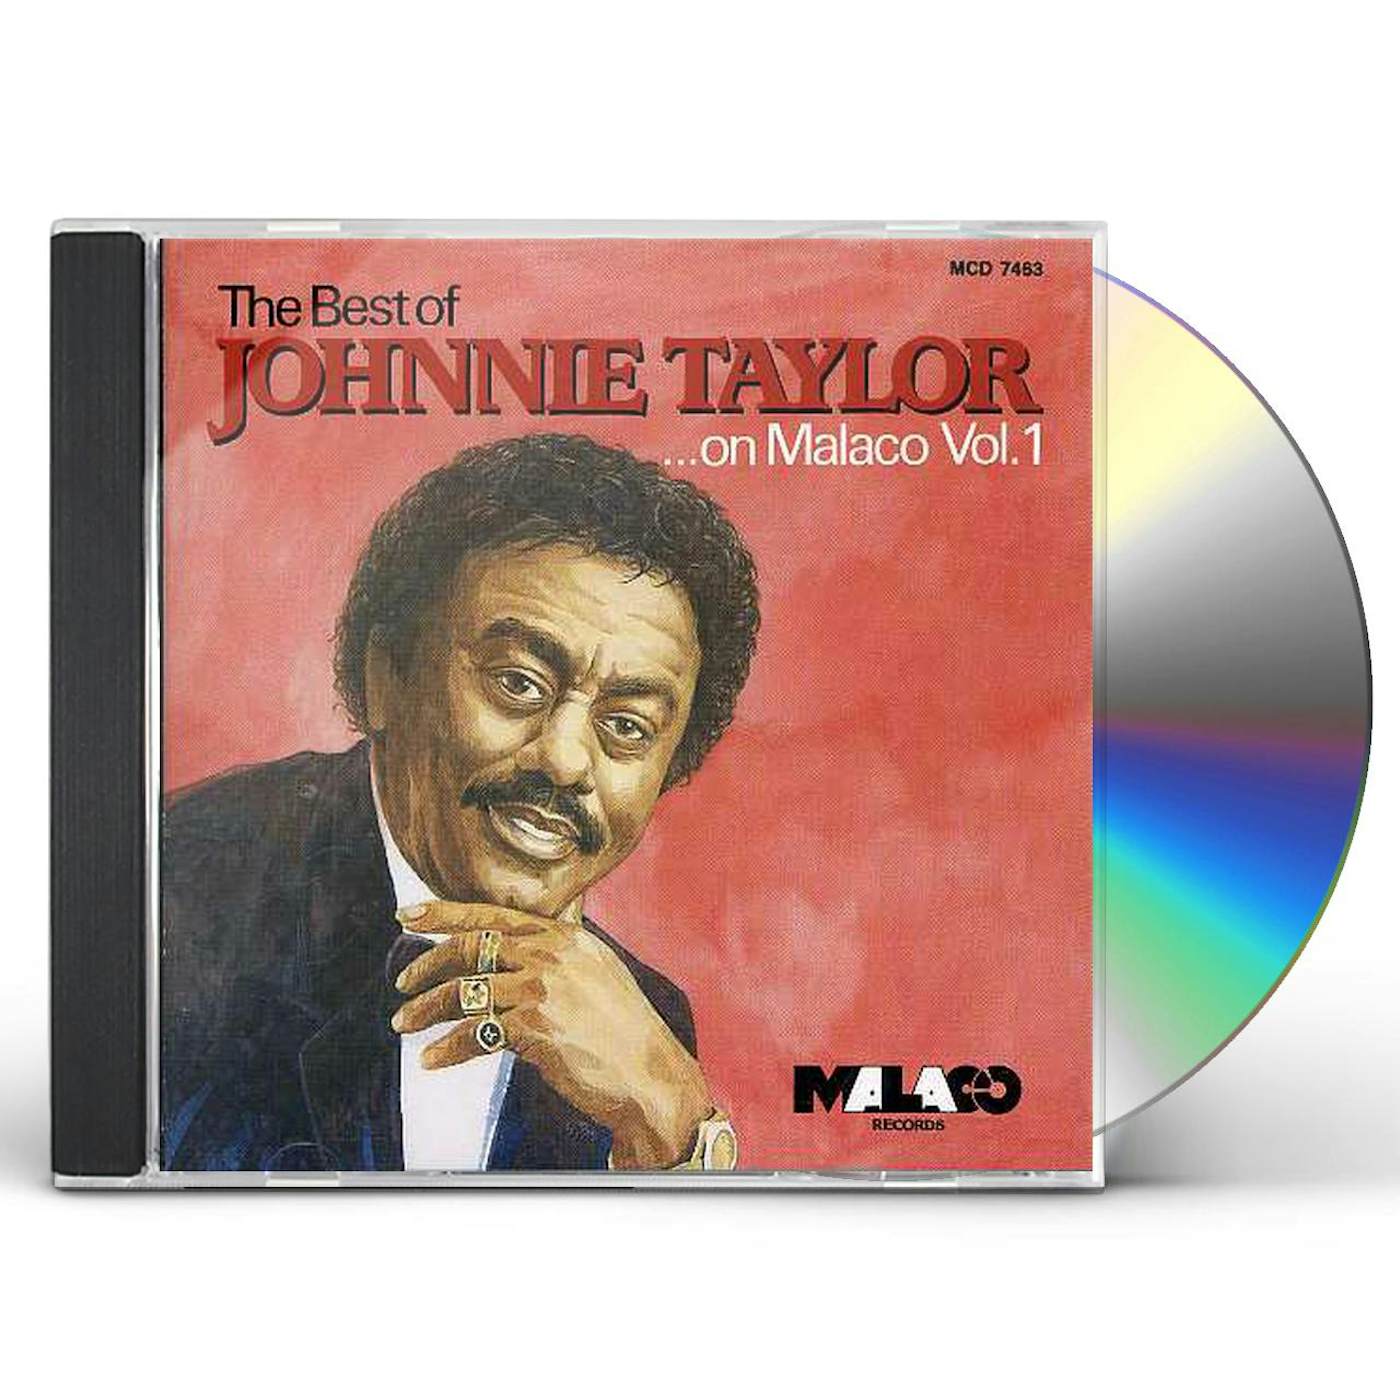 Johnnie Taylor BEST OF CD